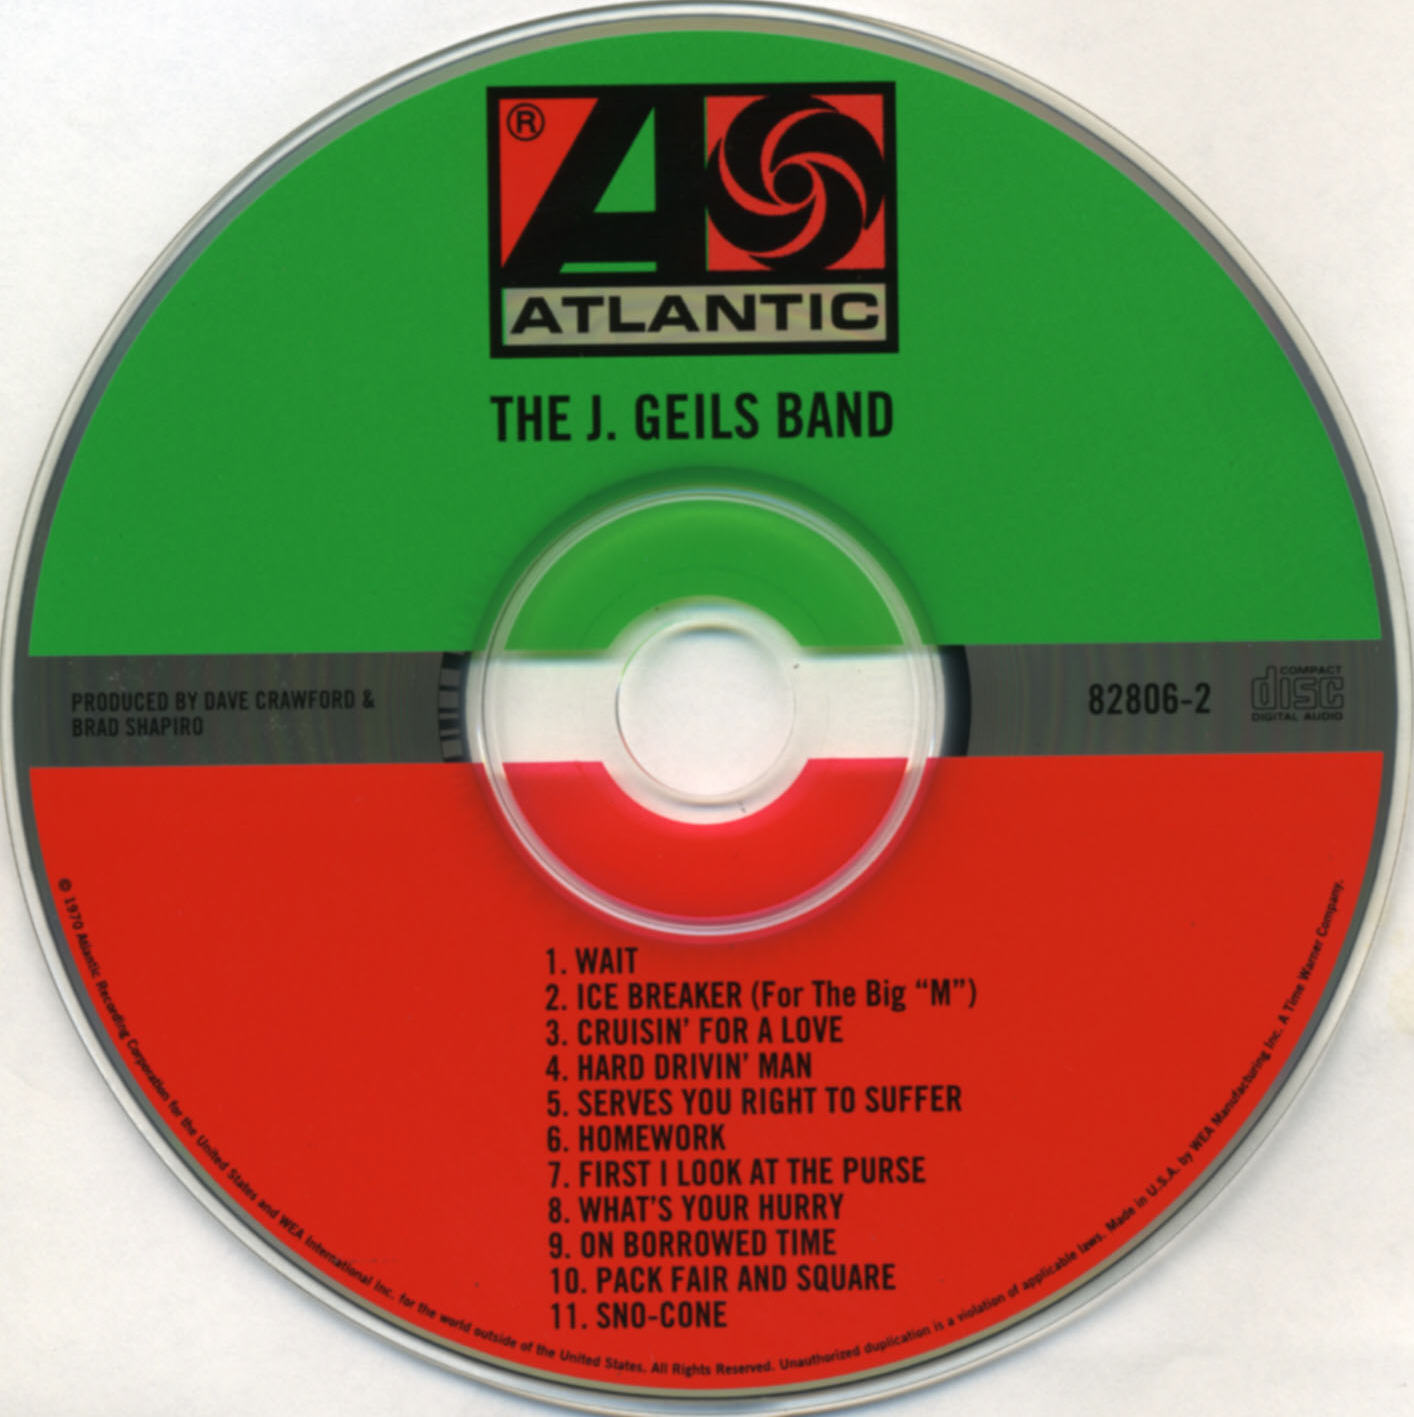 The J. Geils Band The J. Geils Band : CD.